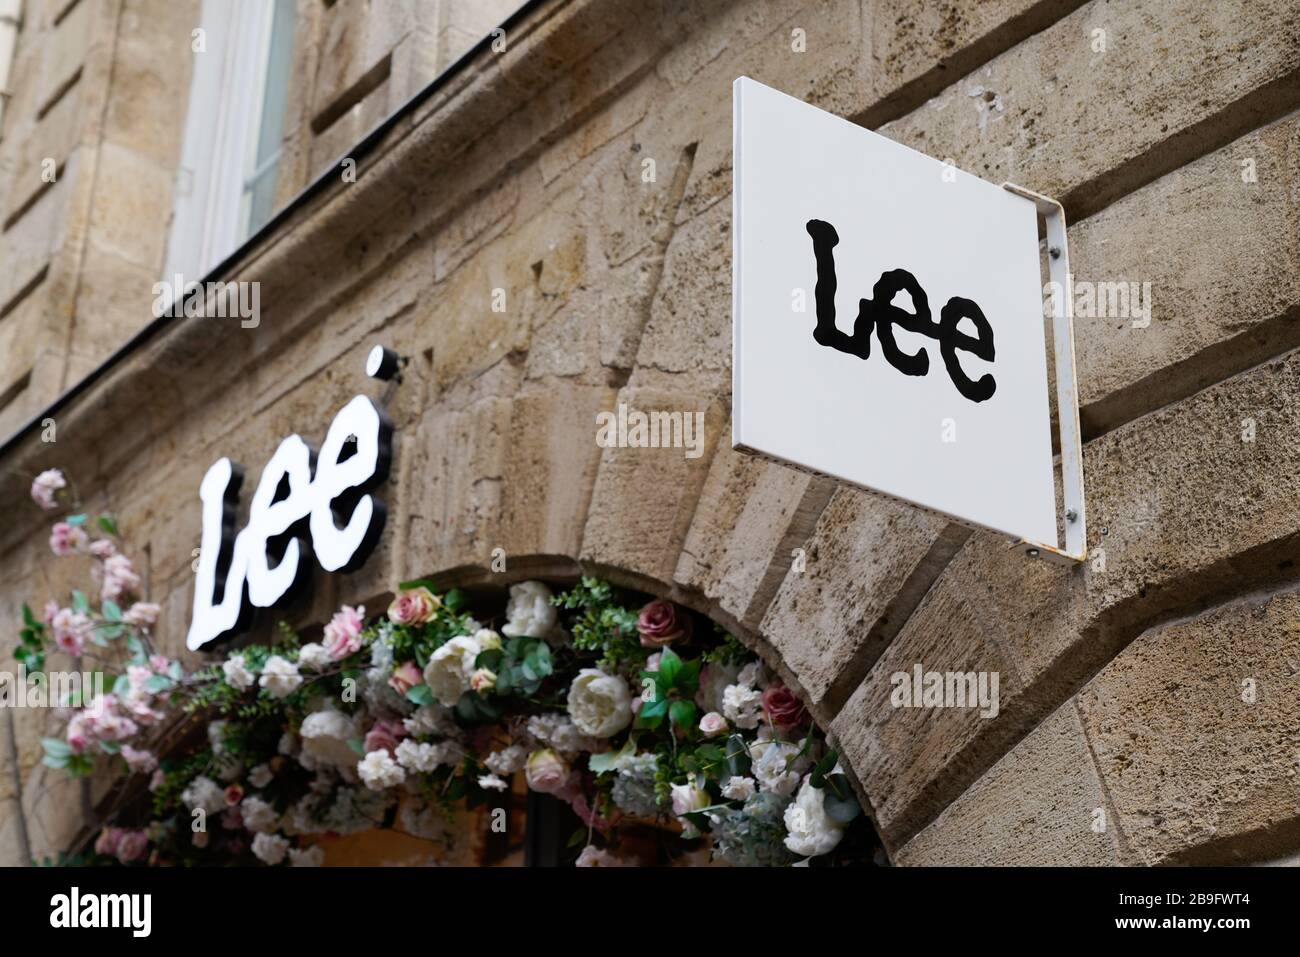 Lee Jeans Logo High Resolution Stock Photography and Images - Alamy